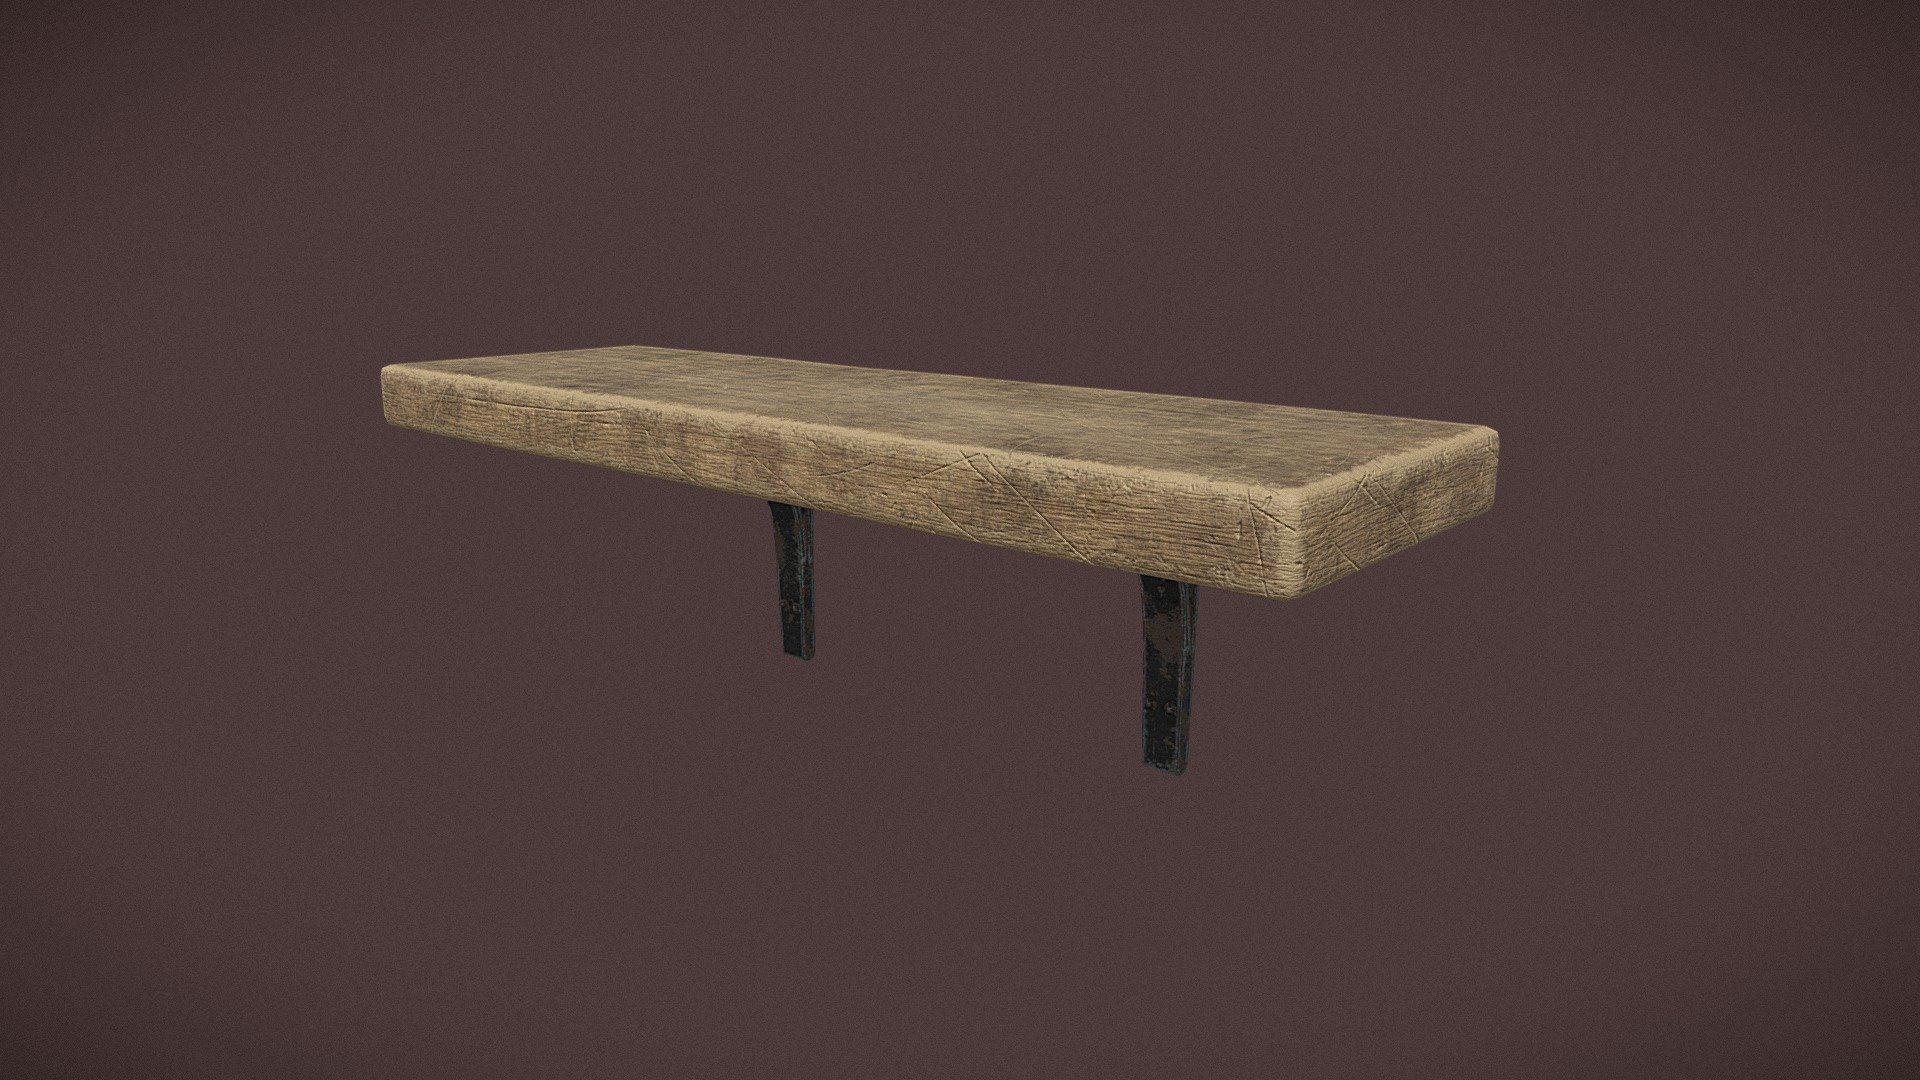 Wooden Mini Shelf High Quality 3D Model PBR Texture available in 4096 x 4096 Maps include : Basecolor, Normal, Roughness, Height and Normal. 3.08 Scaled to real world scale.Customer Service Guaranteed. From the Creators at Get Dead Entertainment. Please like and Rate! Follow us on FaceBook and Instagram to keep updated on all our newest models 3d model